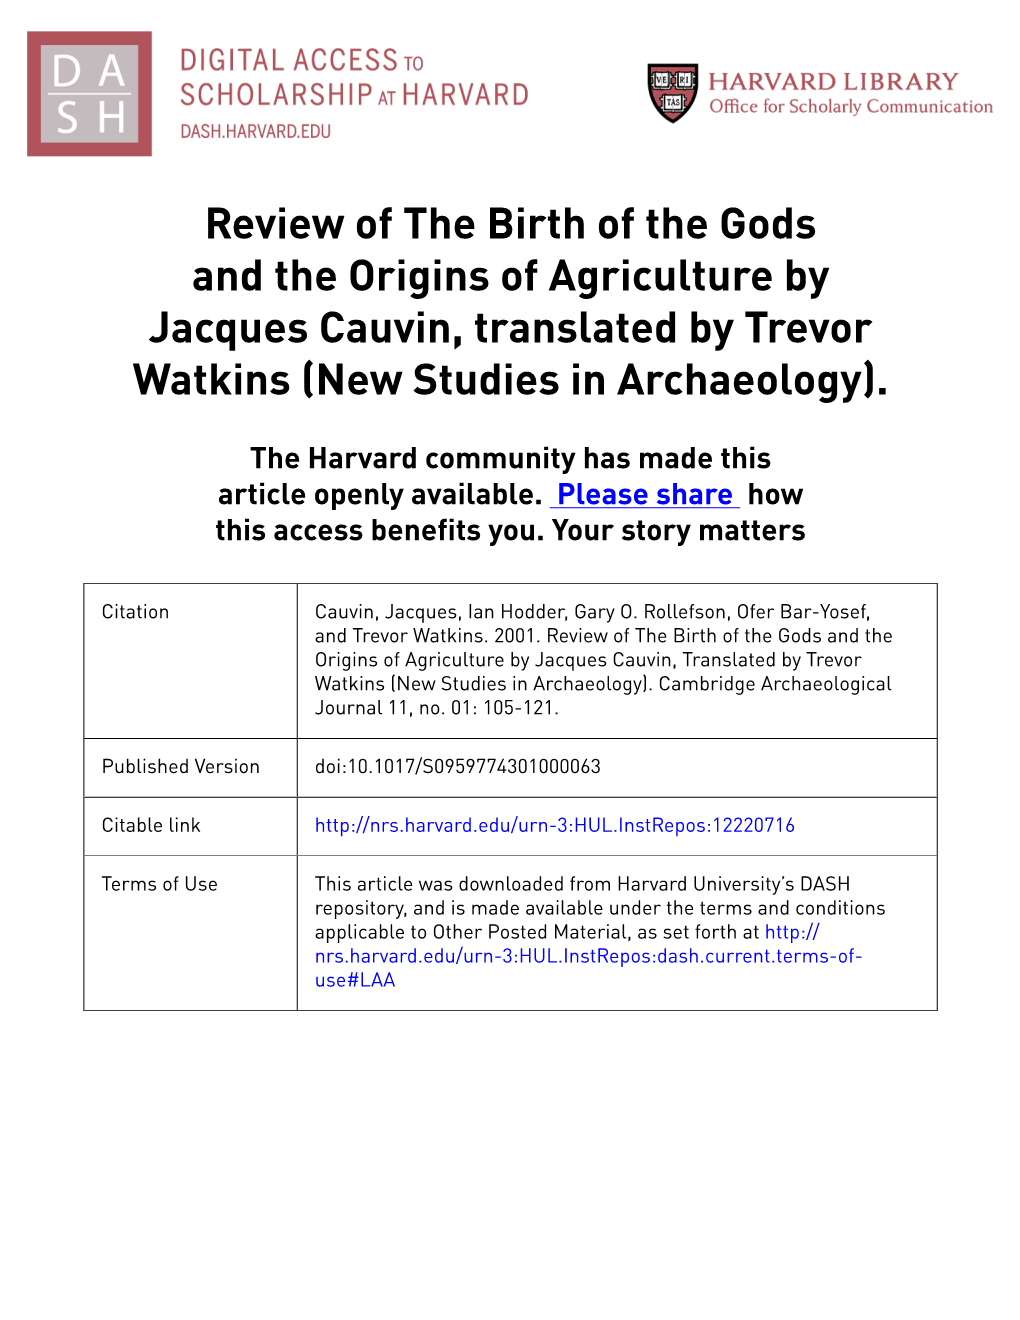 The Birth of the Gods and the Origins of Agriculture by Jacques Cauvin, Translated by Trevor Watkins (New Studies in Archaeology)